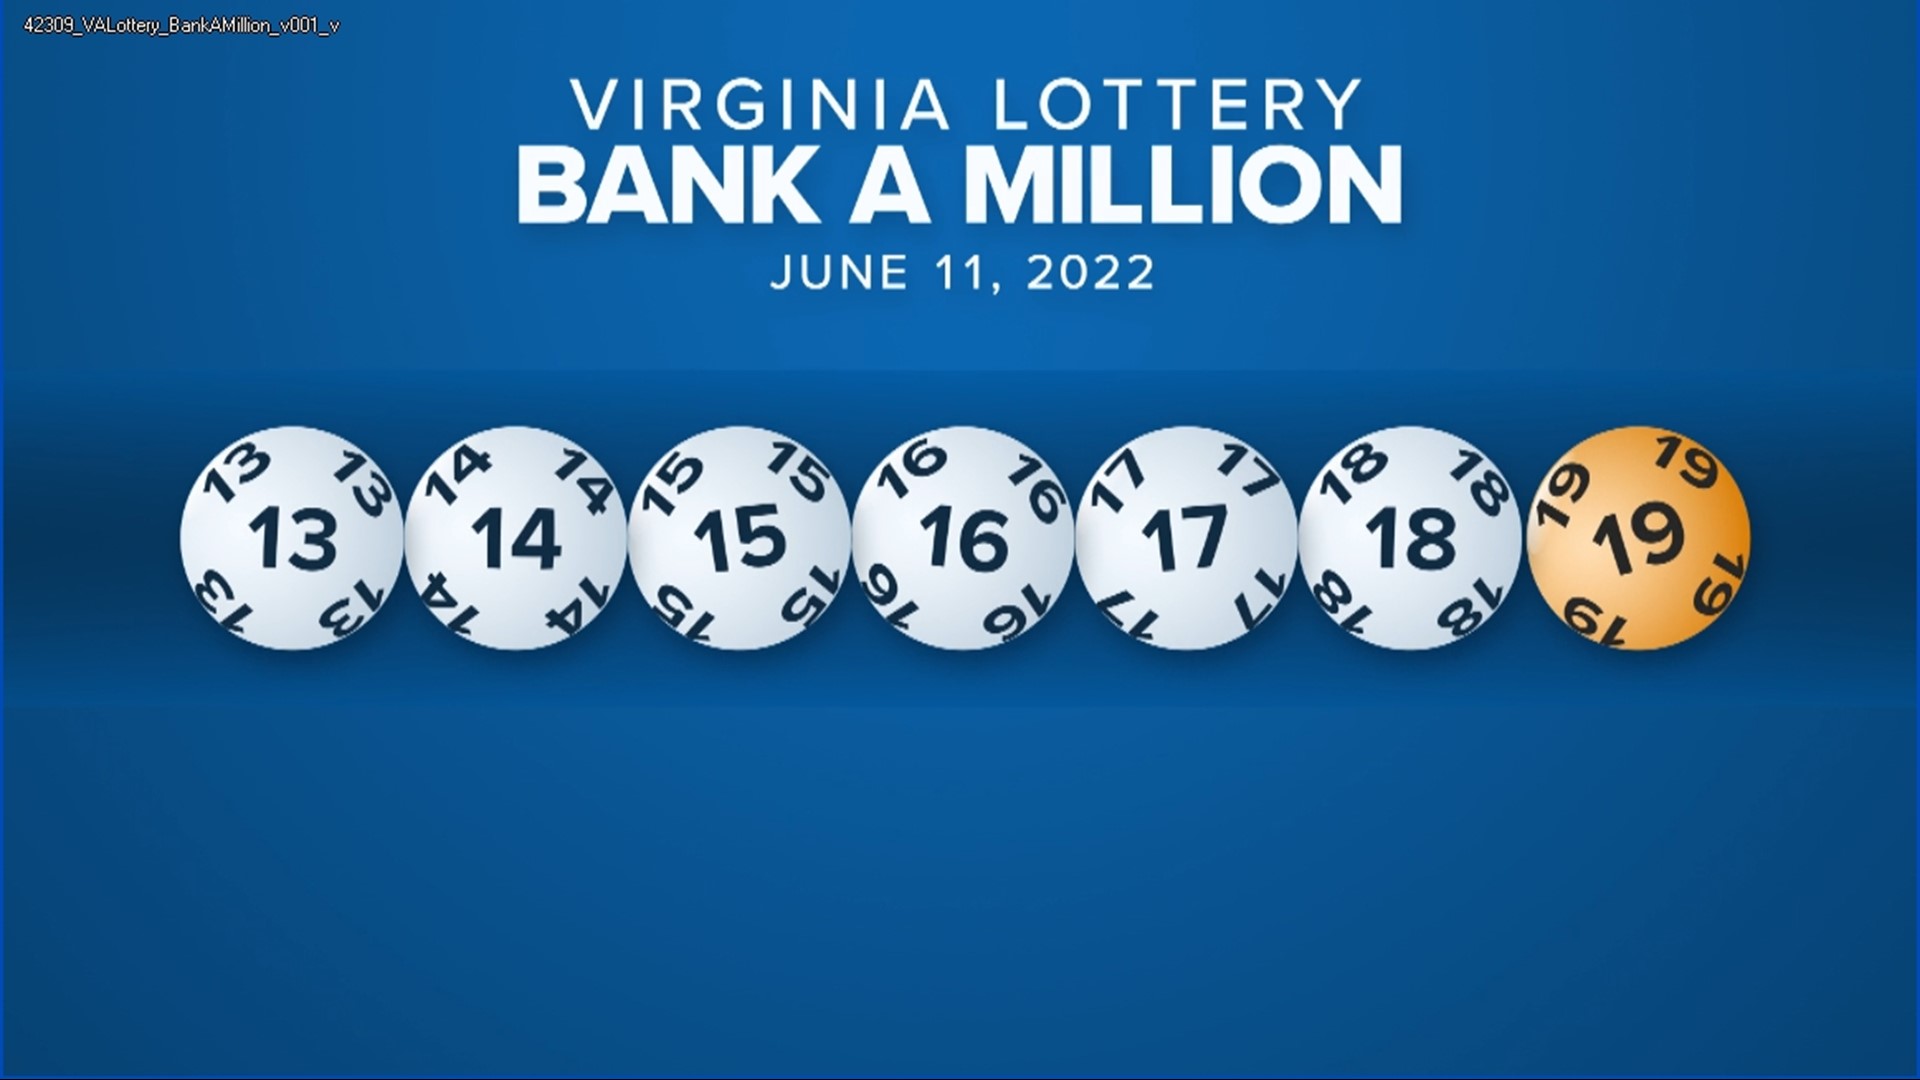 Winning lottery ticket numbers form sequence, but not that rare | wusa9.com